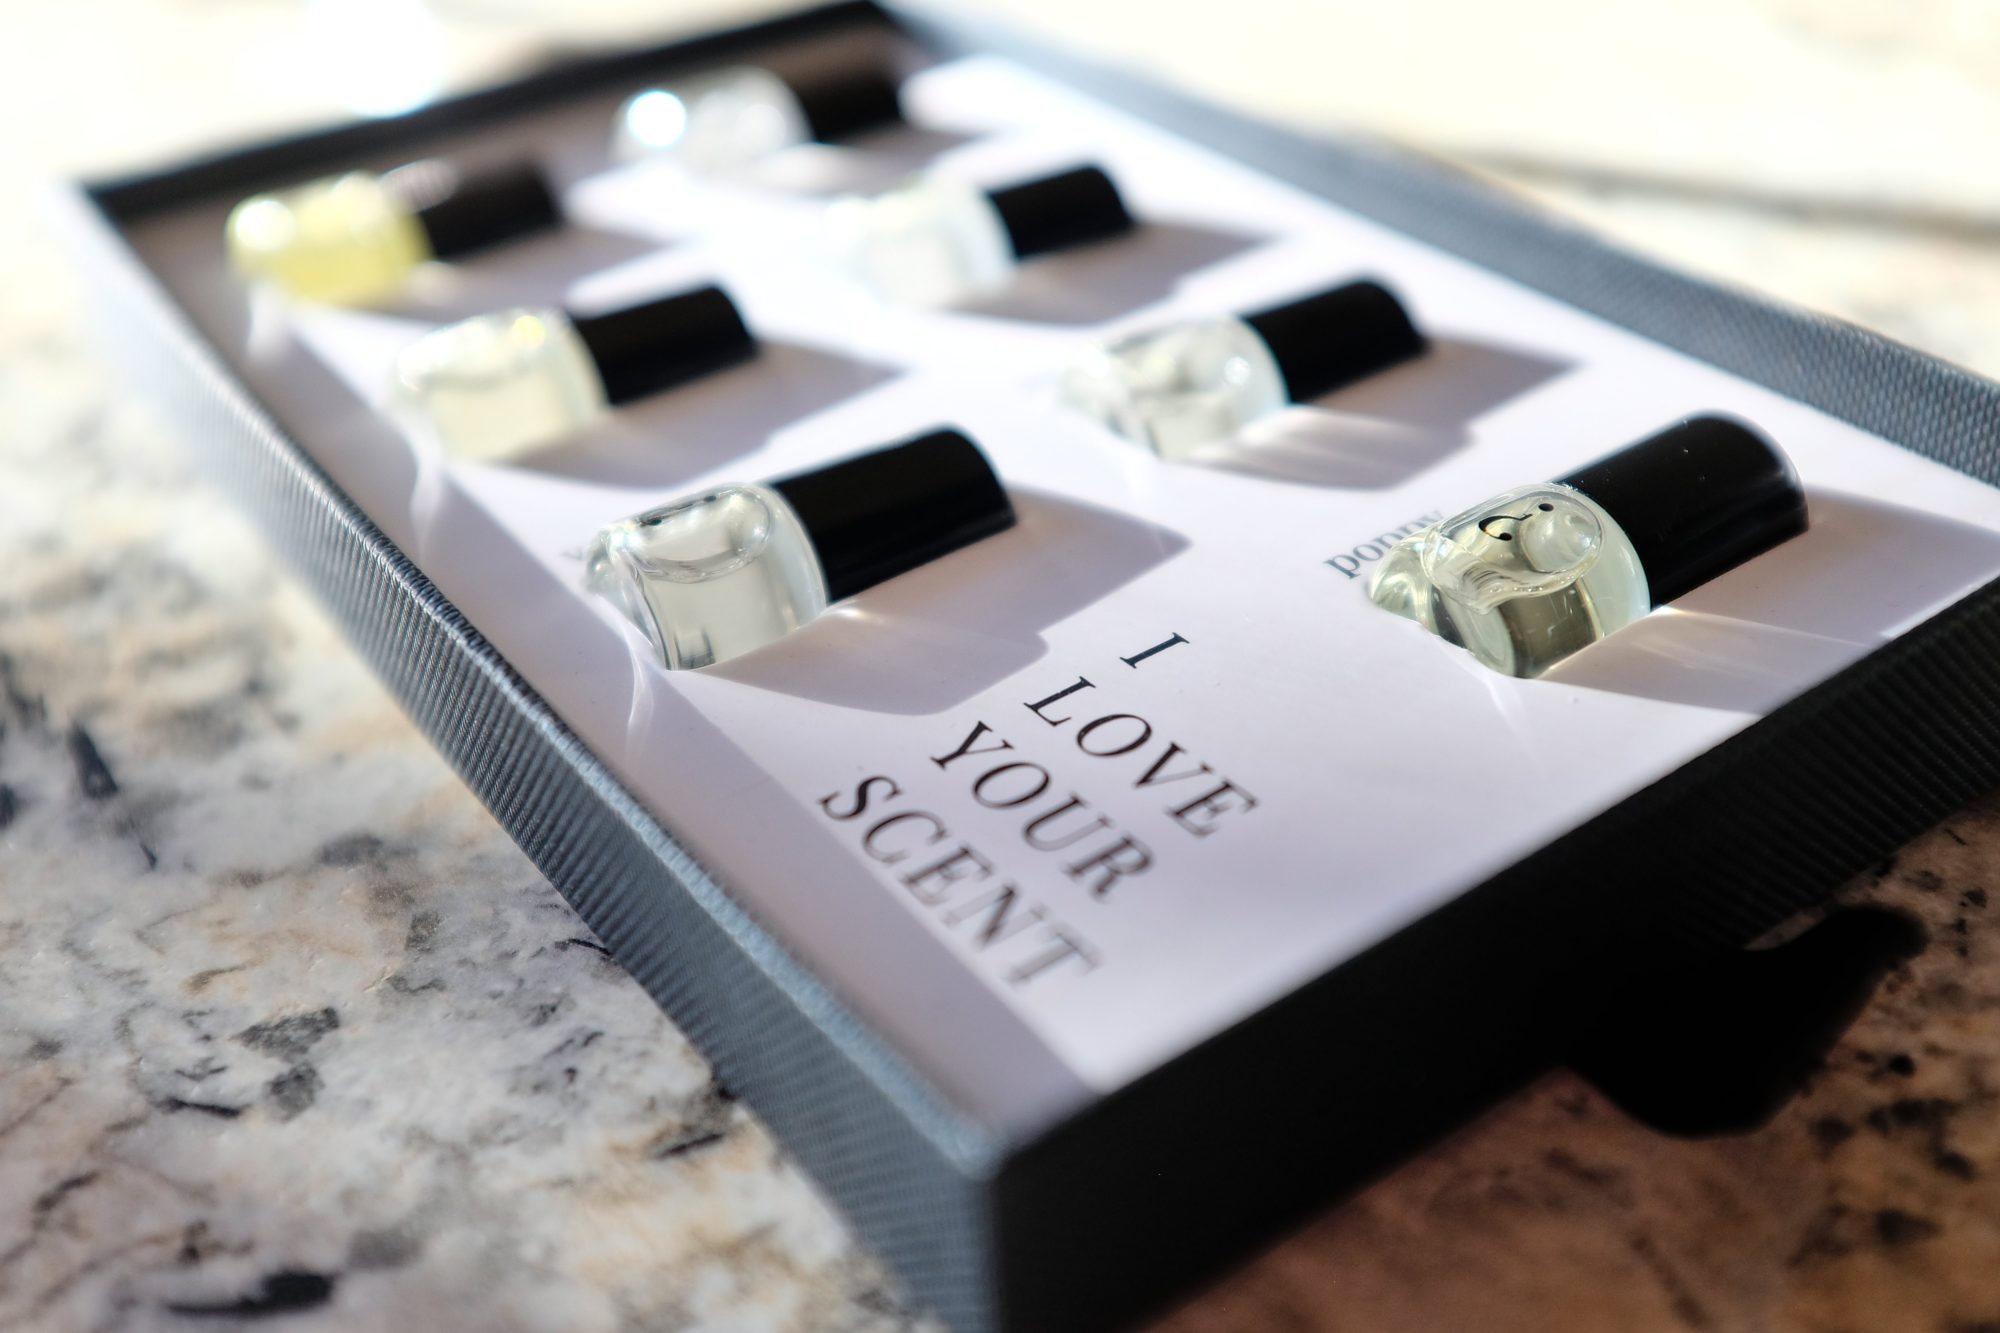 A set of mini bottles sits in a box that reads "I love your scent"